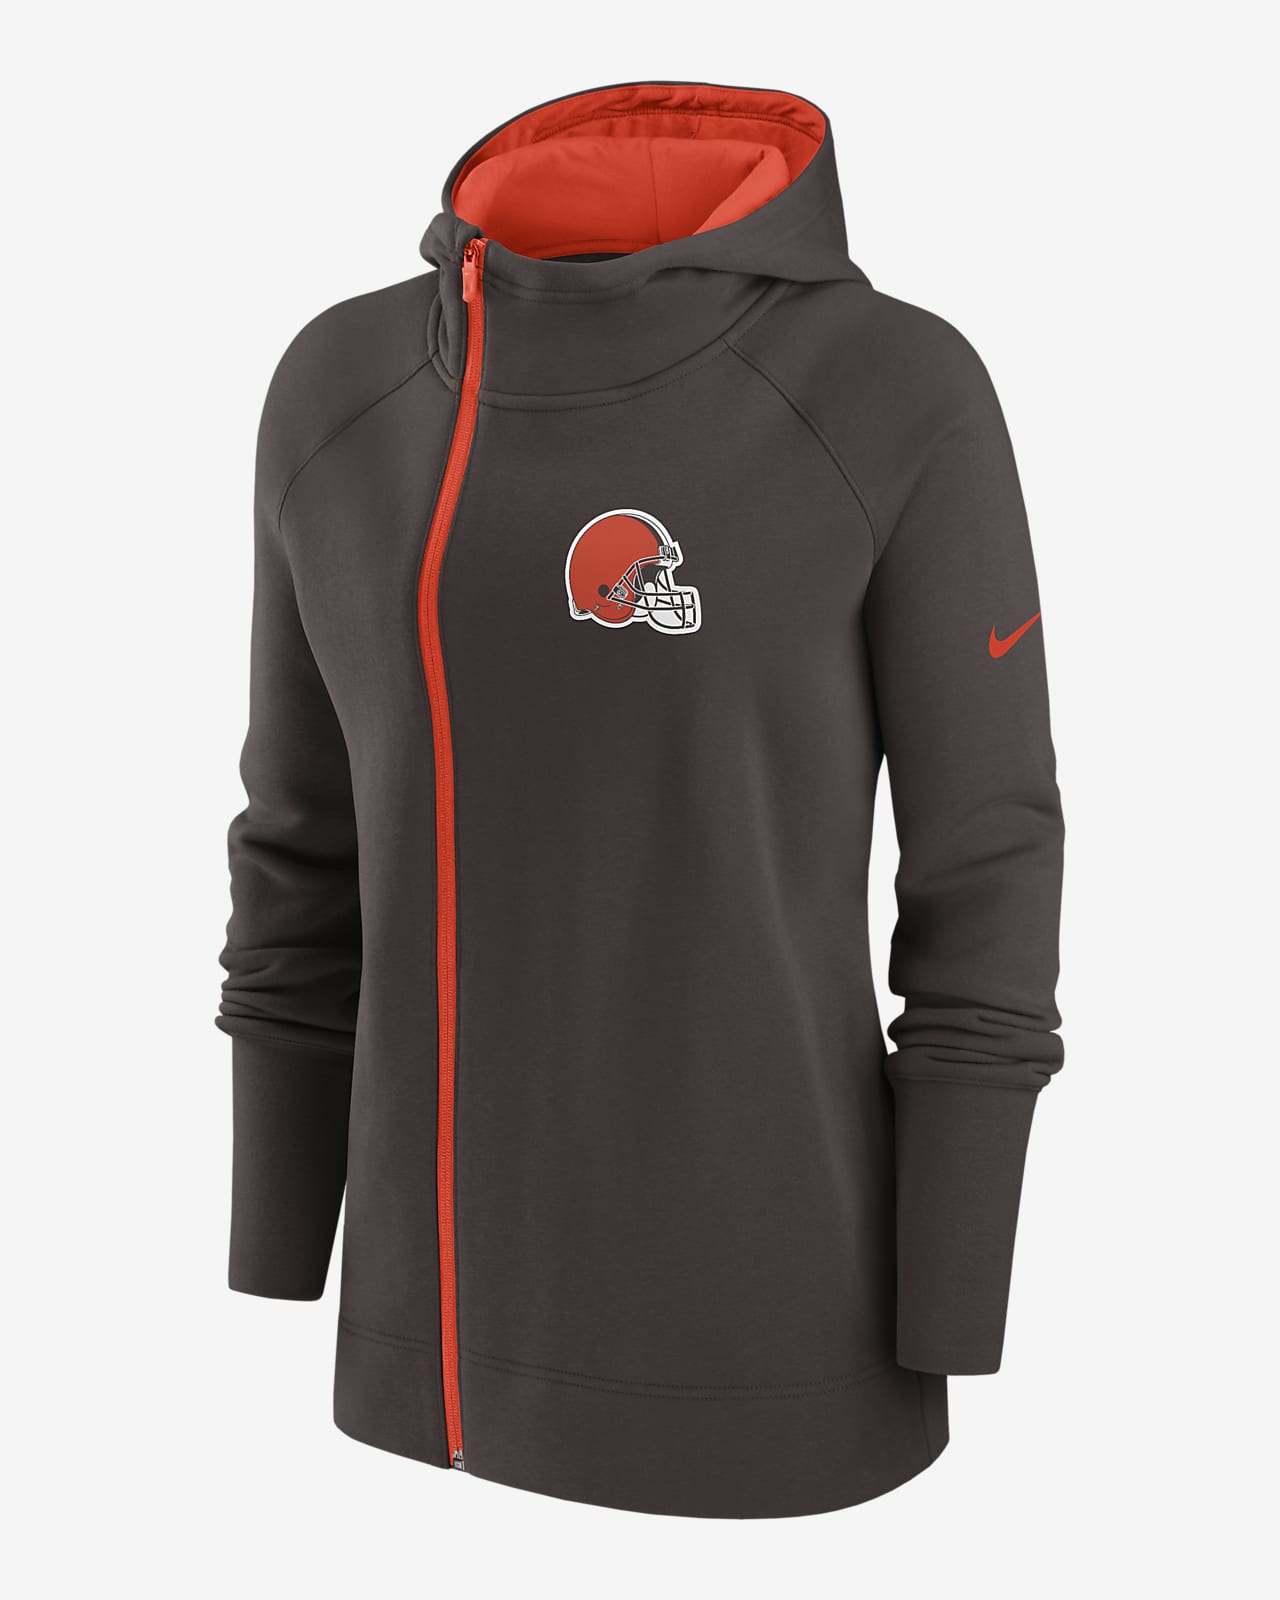 Nike Women's Assymetrical (NFL Cleveland Browns) Full-Zip Hoodie in Brown, Size: Xs | 00CY010K93-06K